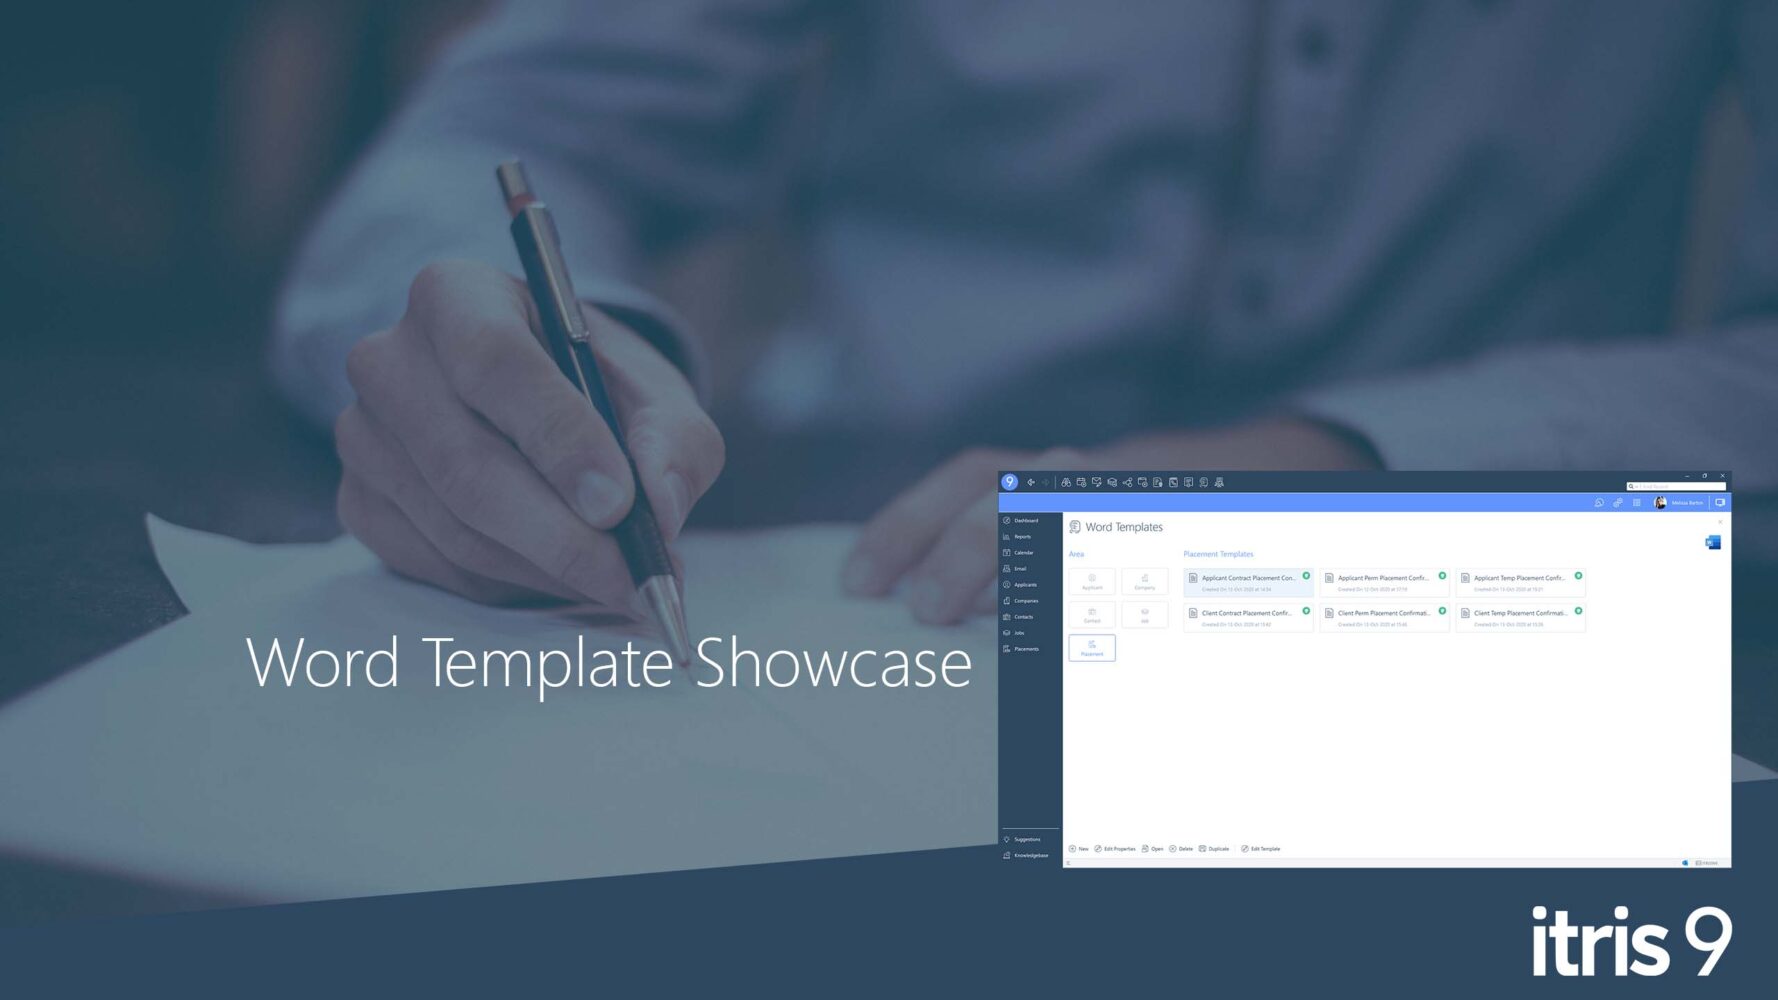 Recruitment CRM software itris 9 | Word Template | Showcase Video